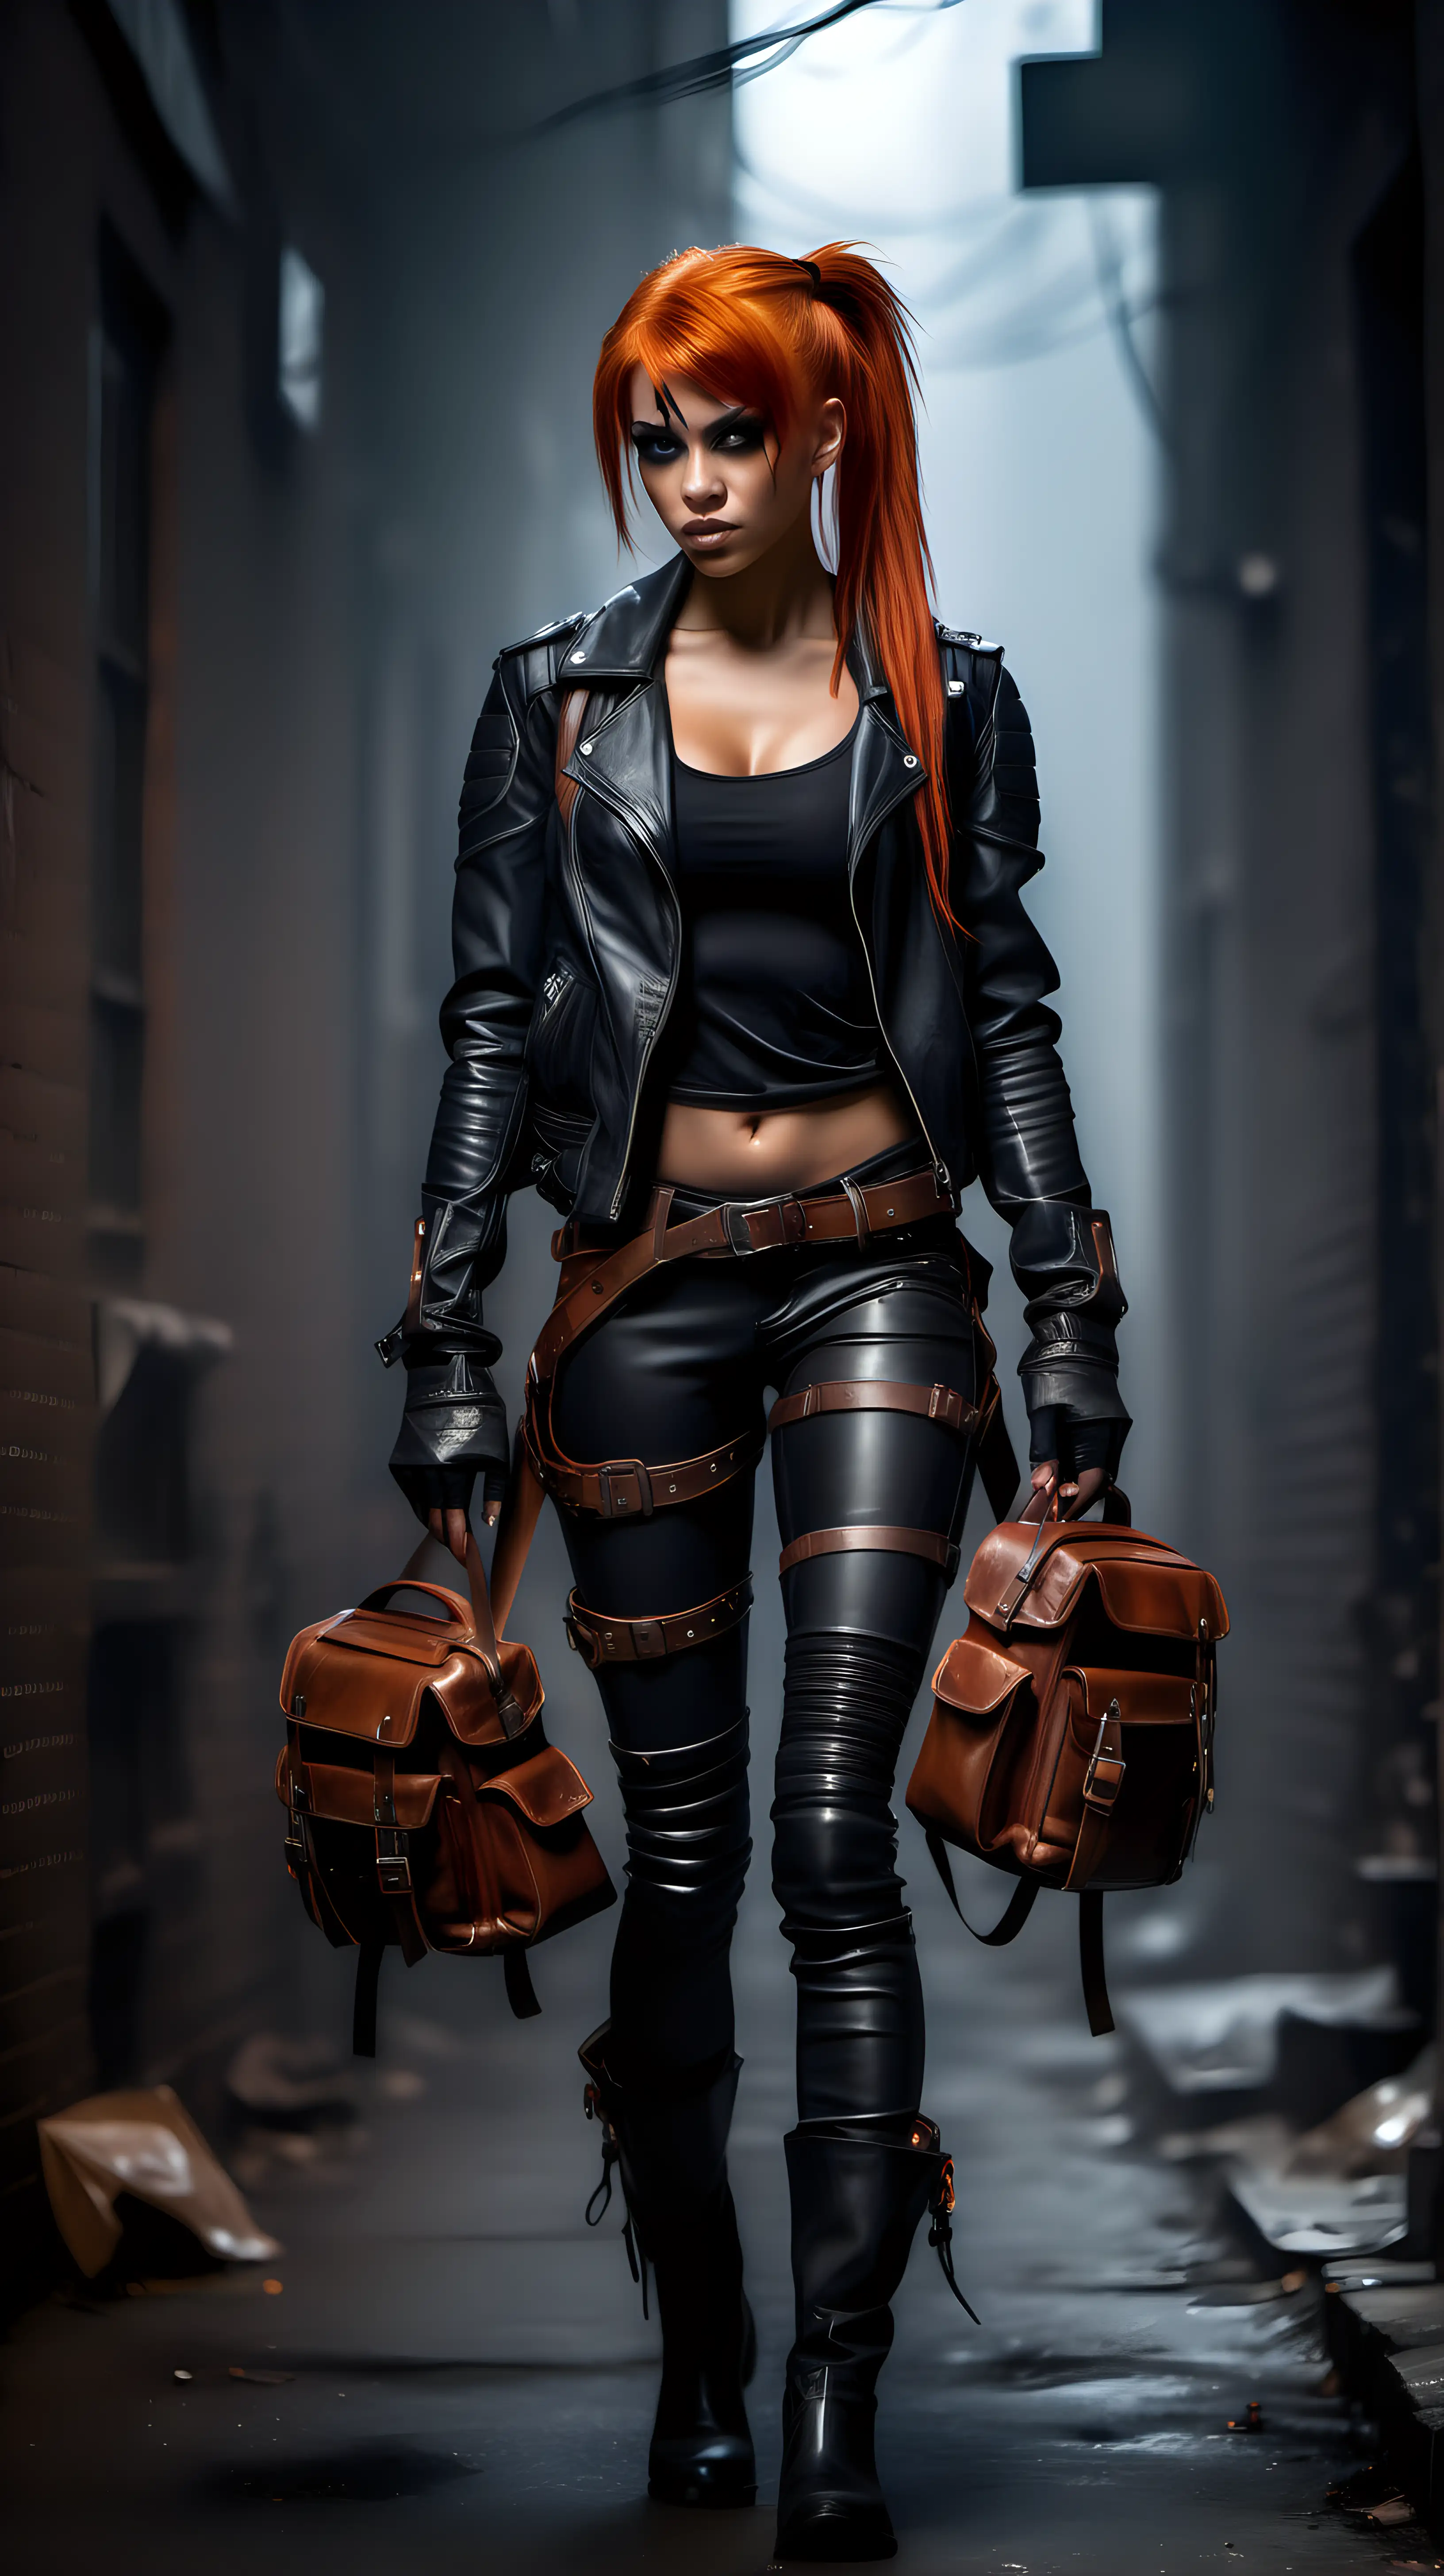 Muscular petite rogue with leather clothes and orange hair, light brown skin, two pony tails, leather jacket, leather boots, leather pants, holding a backpack, fantasy style, full length portrait, dark foggy alley